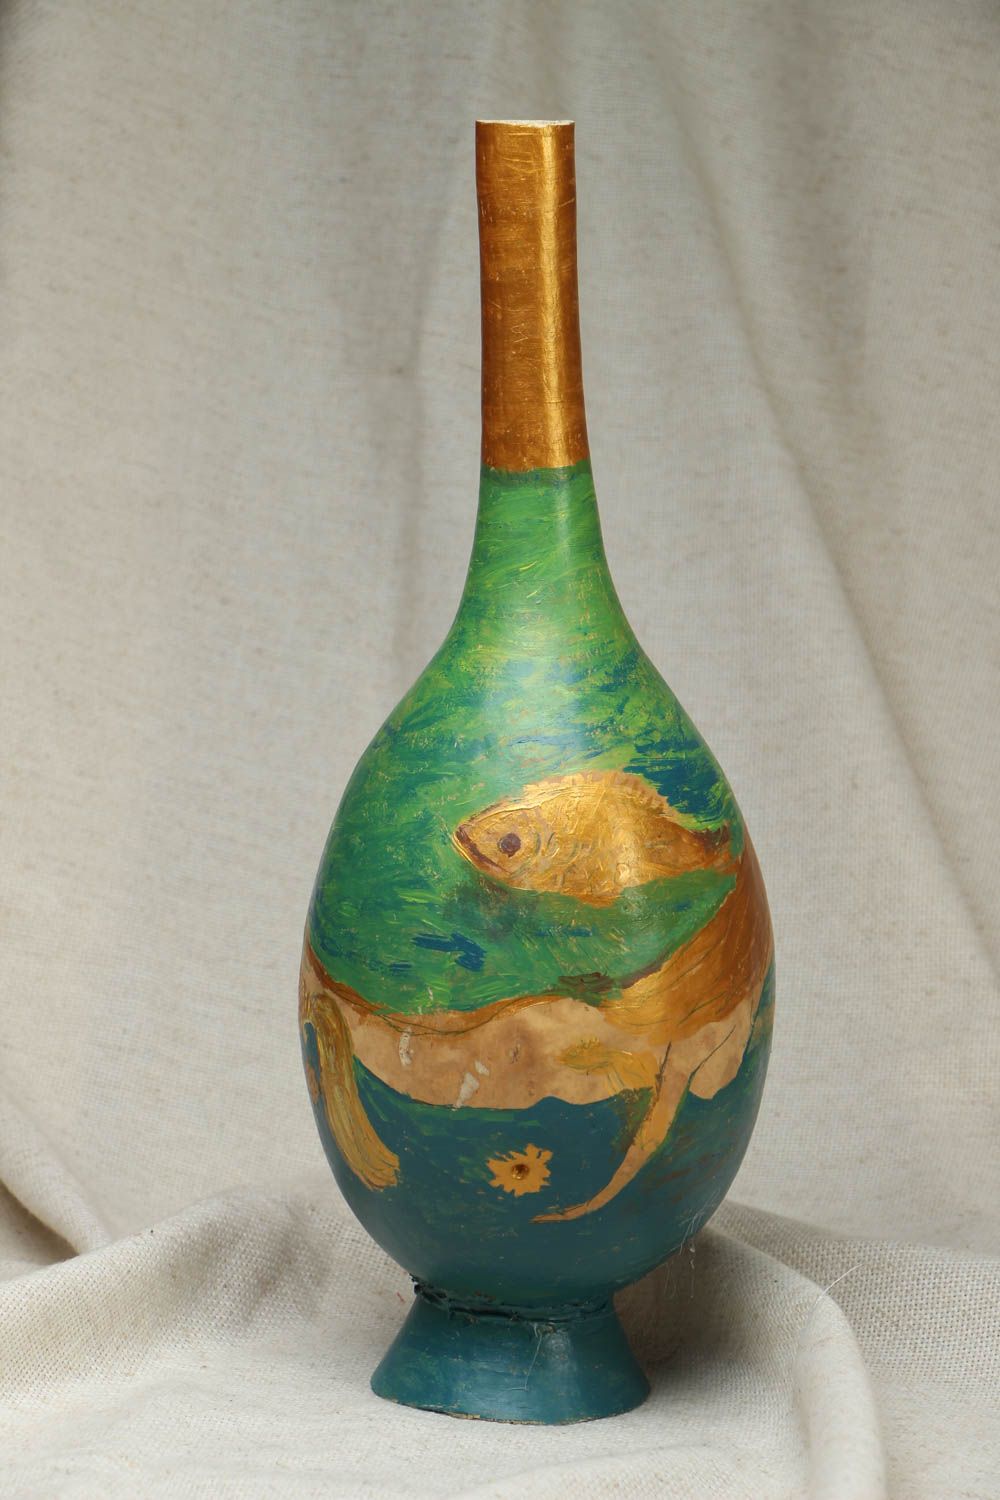 Art decorative floor 17 inches gourd vase with fish picture 0,25 lb photo 1